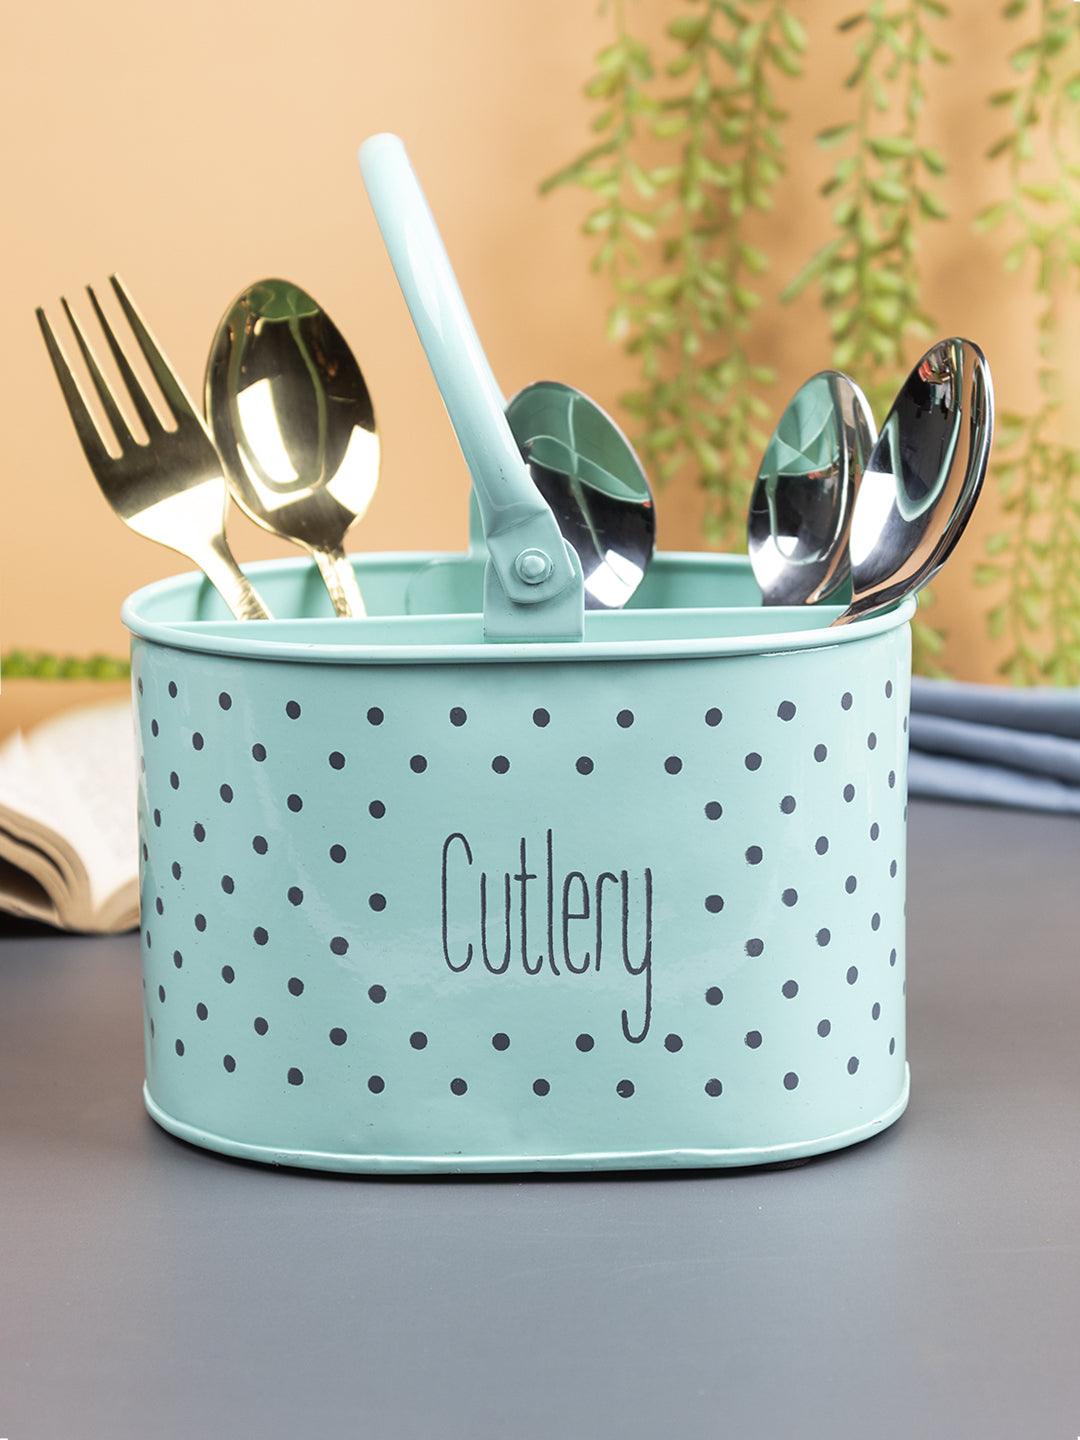 Green Cutlery Holder with Polka Dot